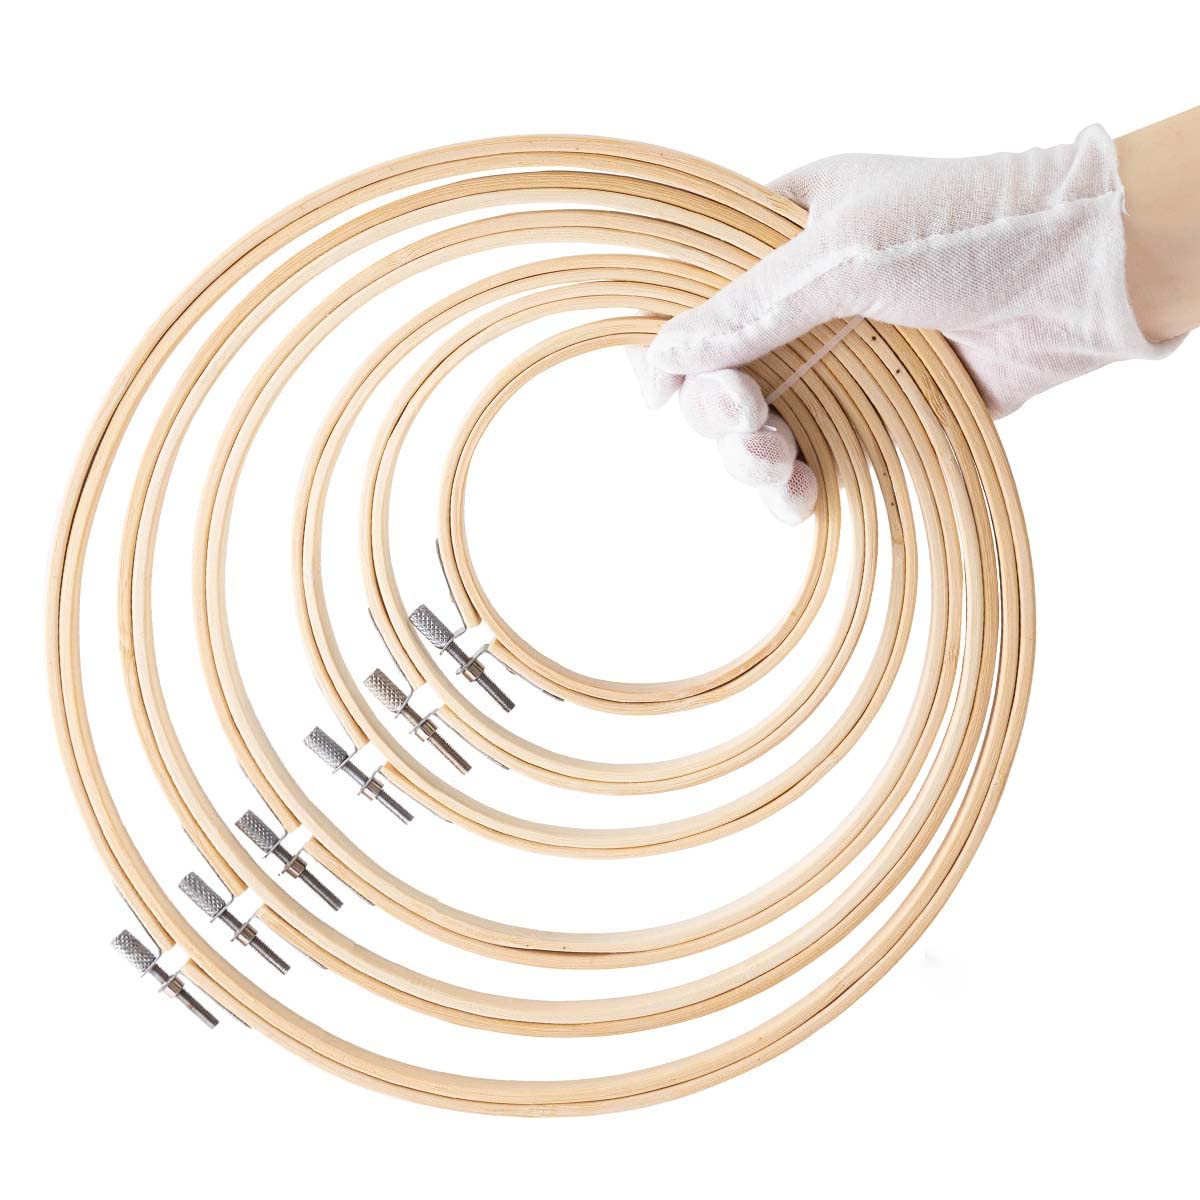 Matchne Embroidery Hoop 6PCS 4Inch to 10Inch Easily Loosen/Tighten Cross  Stitch Supplies & Needlework Supplies Bamboo Wooden Hoops for Crafts 1 Pack  (Total 6pcs)